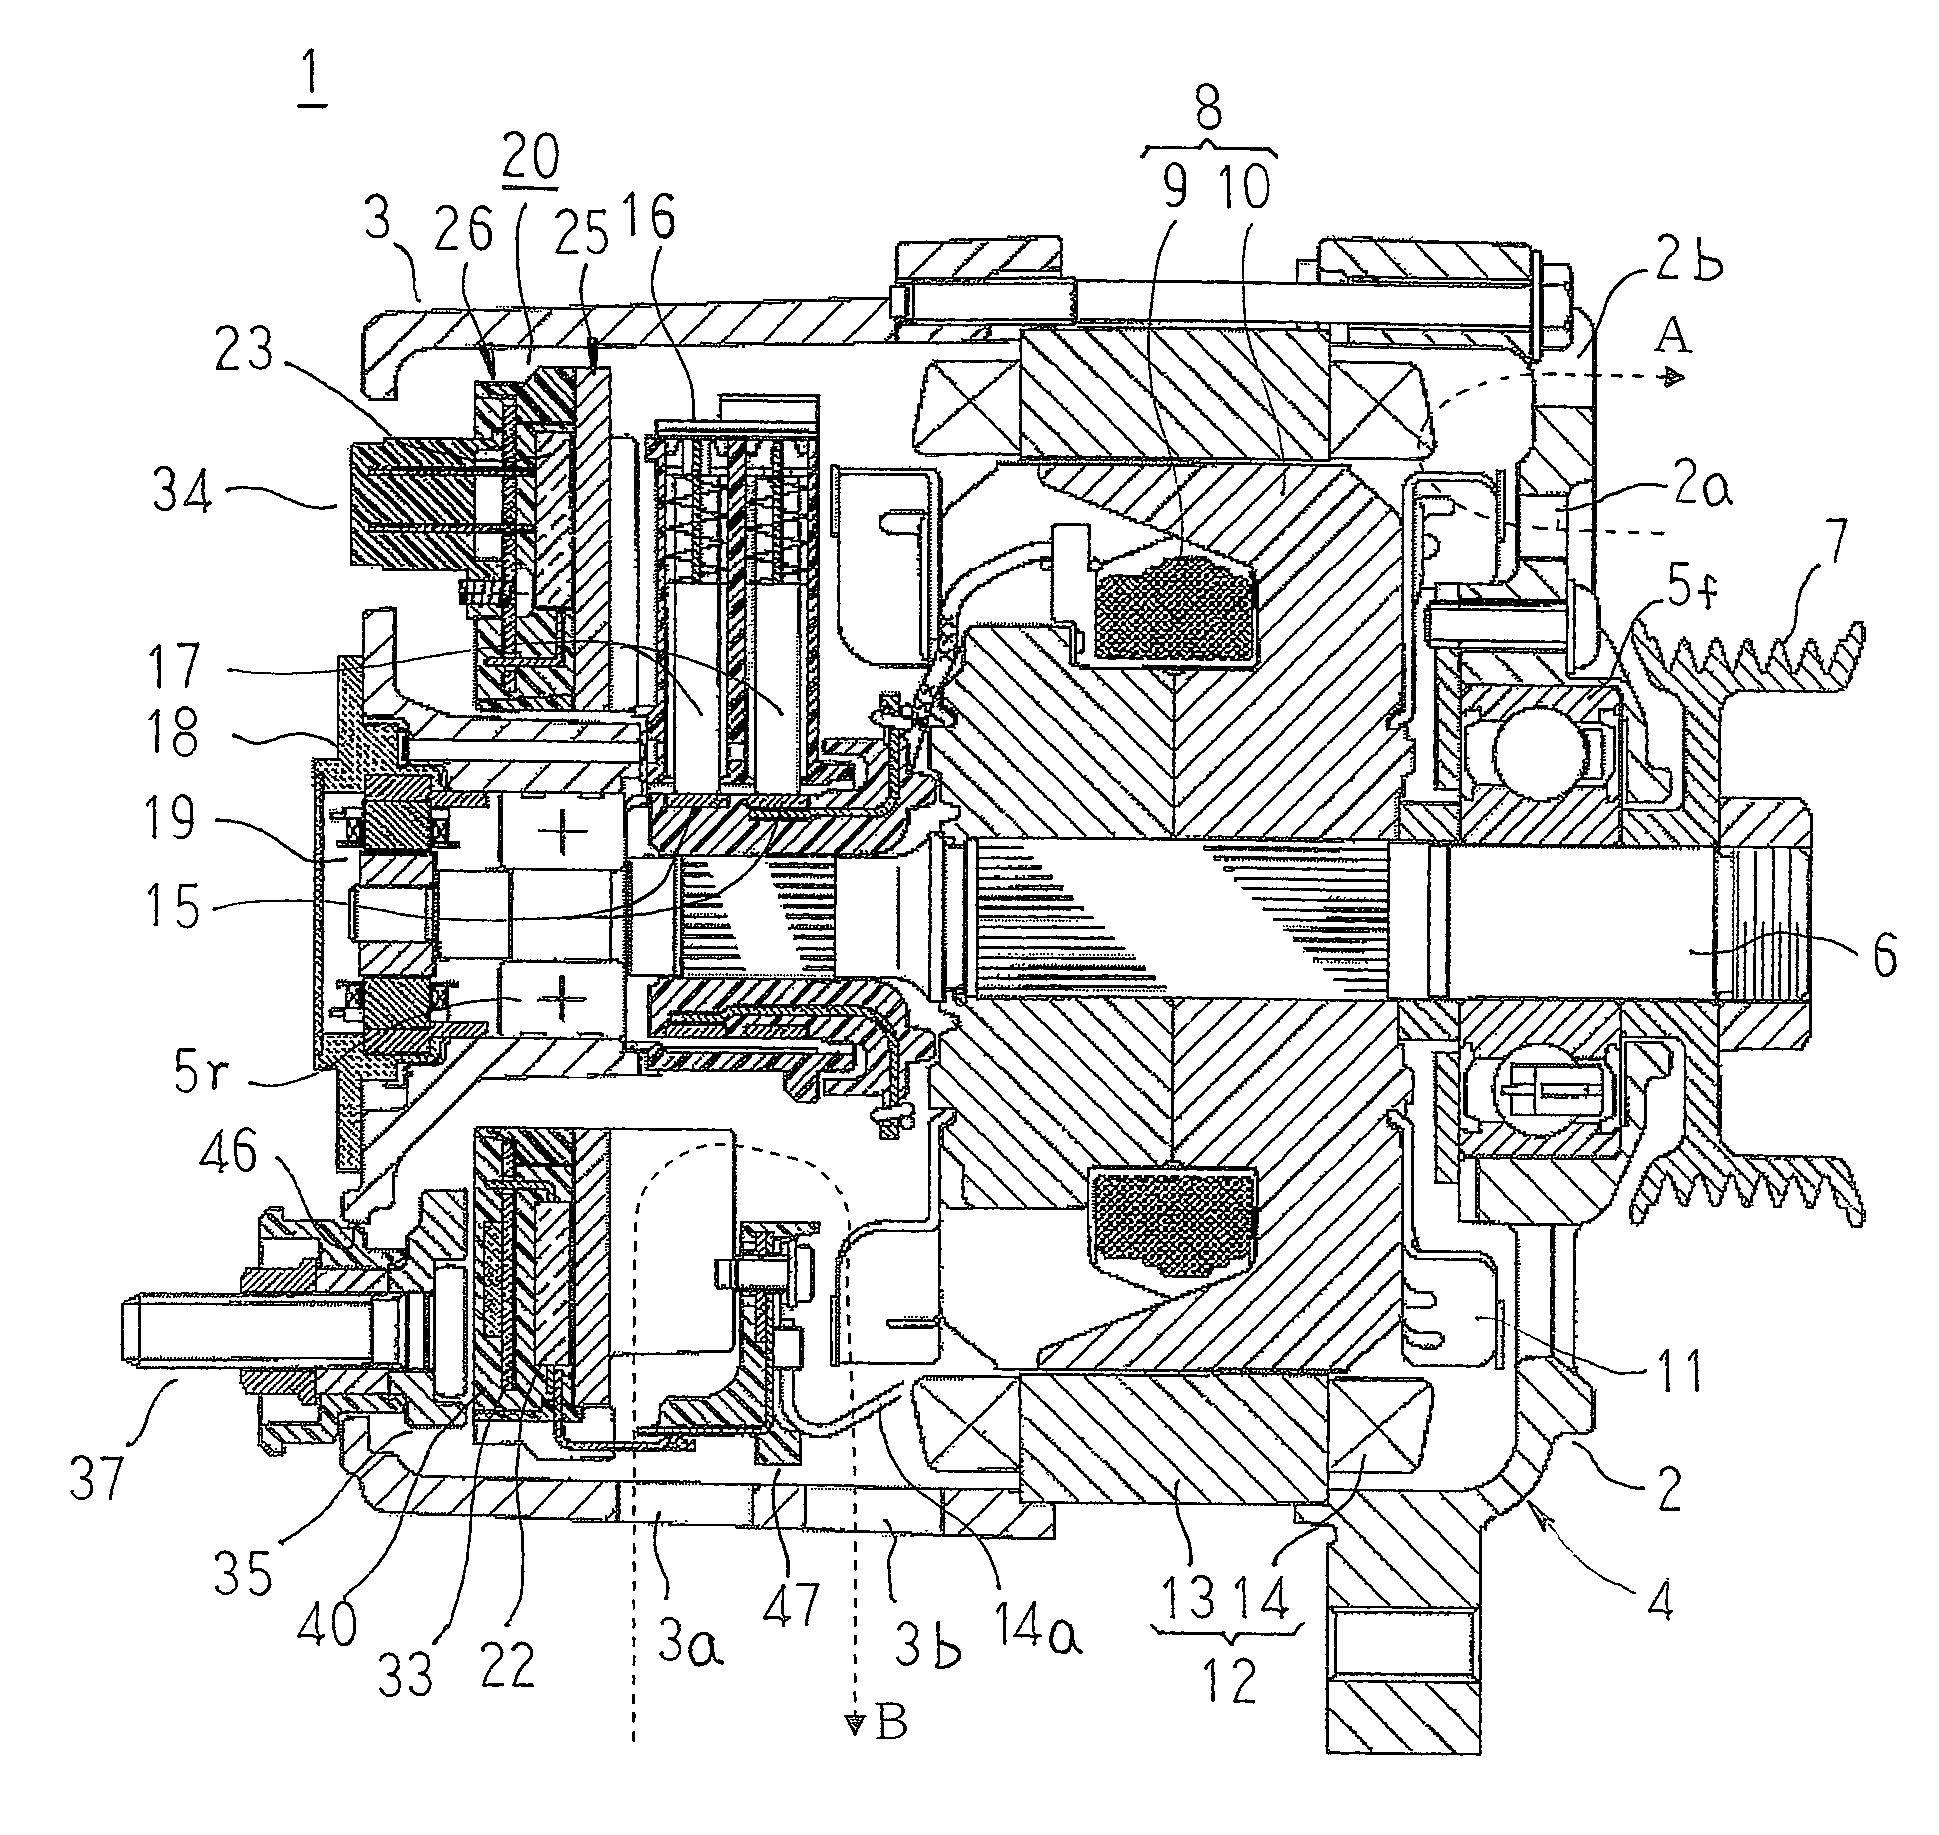 Automotive controlling apparatus-integrated dynamoelectric machine